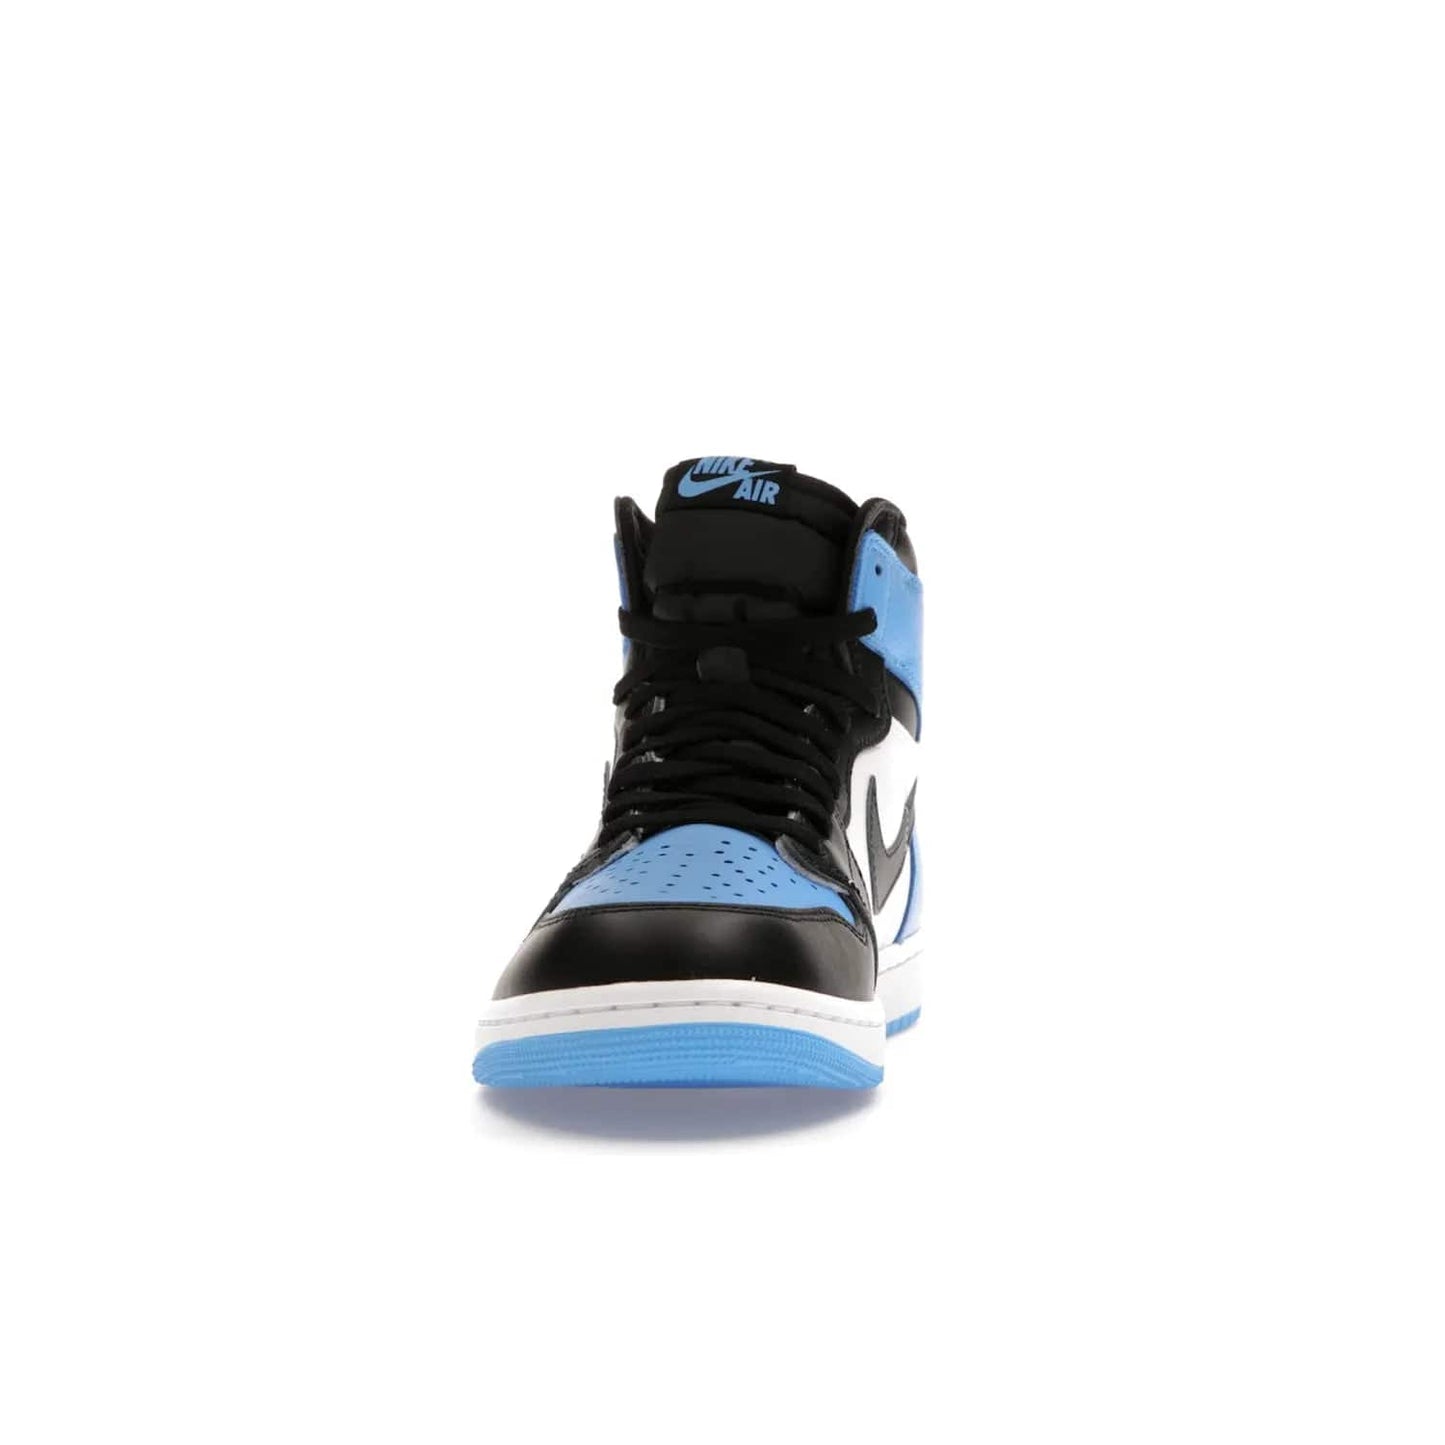 Jordan 1 Retro High OG UNC Toe - Image 11 - Only at www.BallersClubKickz.com - Jordan 1 High OG UNC Toe is a fashionable, high-quality sneaker featuring University Blue, Black White and White. Releasing July 22, 2023, it's the perfect pick up for sneakerheads.